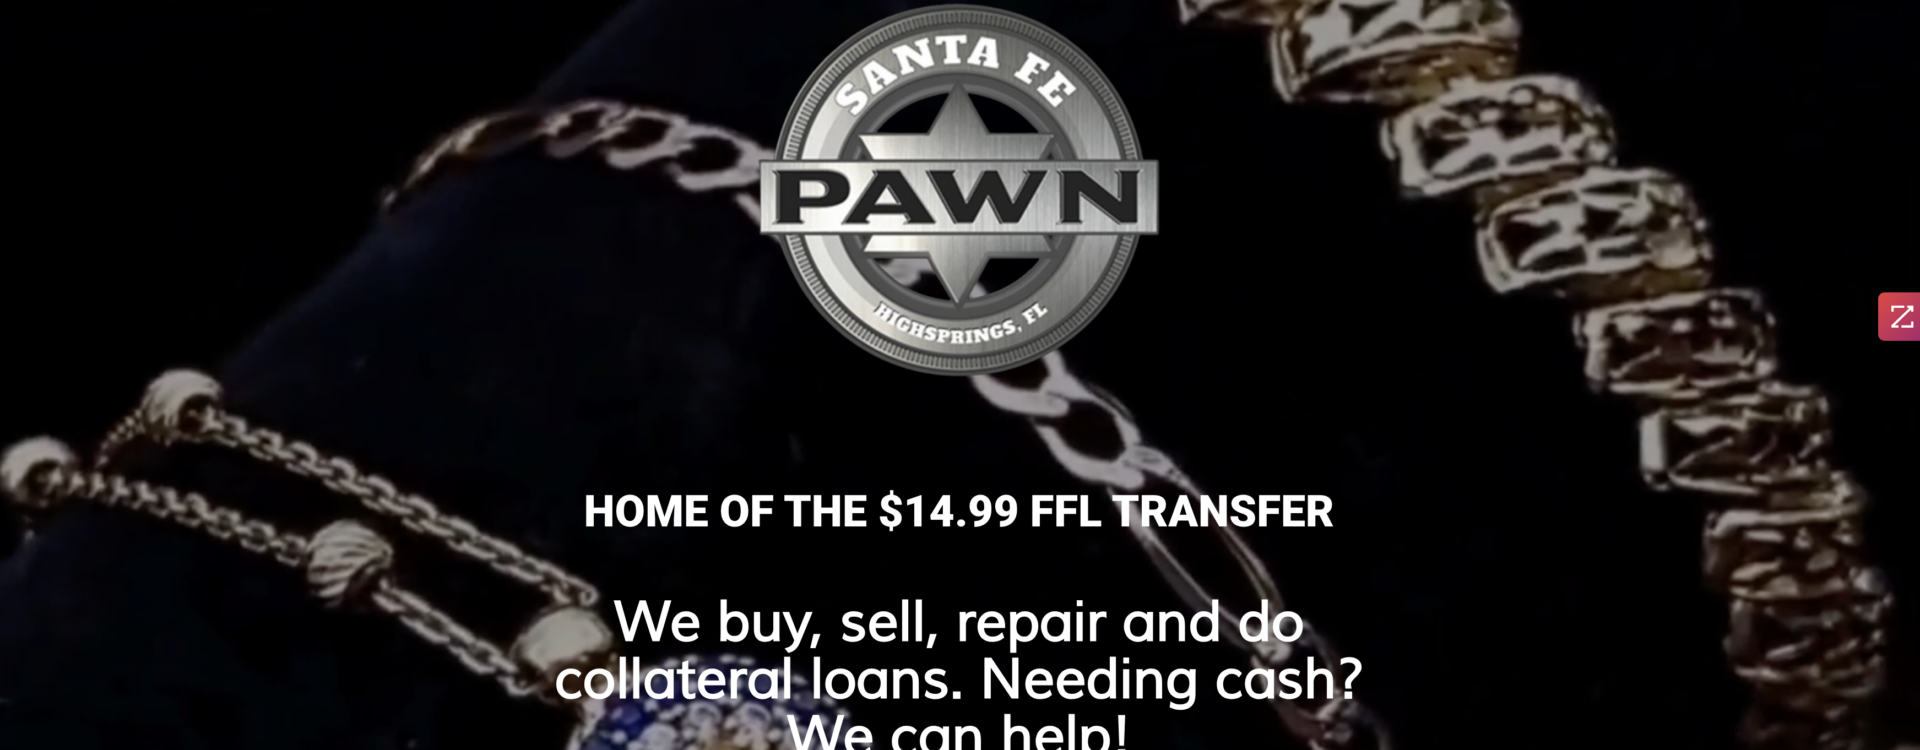 santa fe pawn website built by Imperium Marketing Solutions